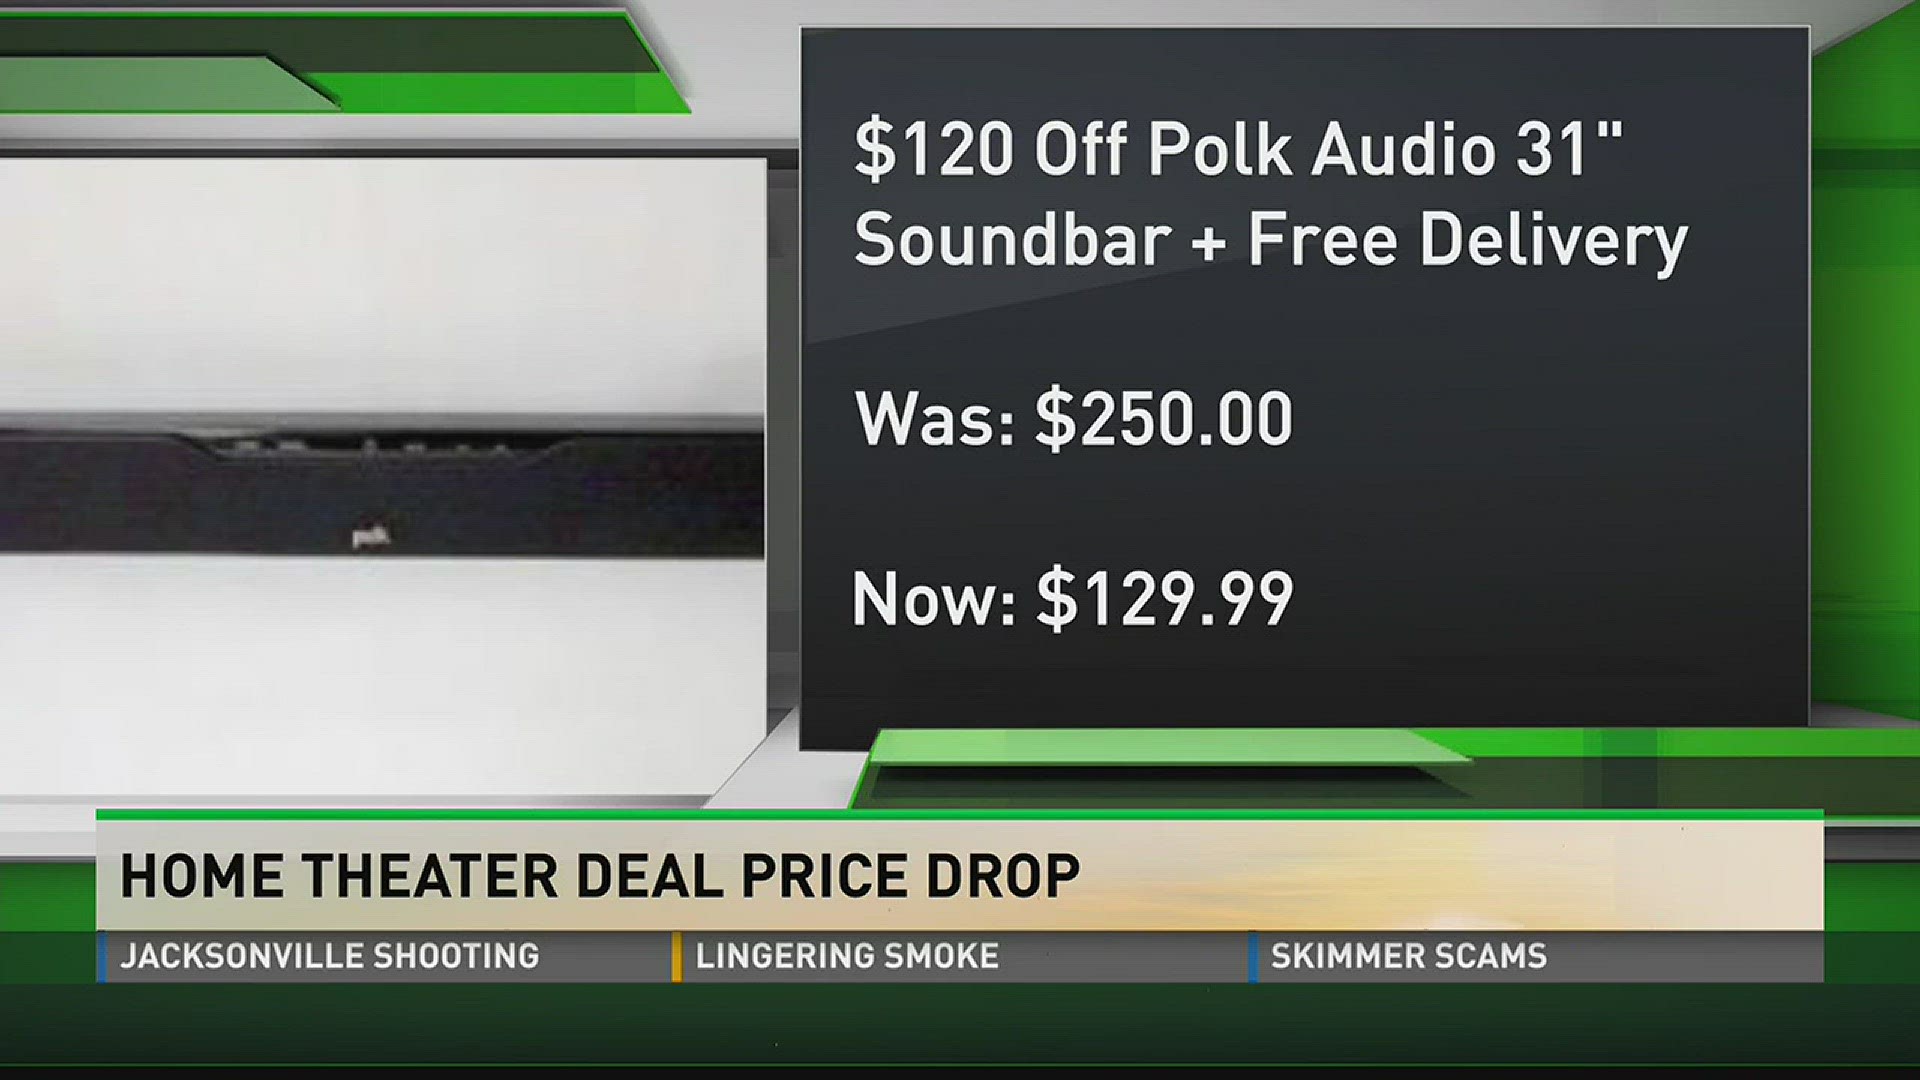 Money man Matt Granite shows how to save on home theater system.